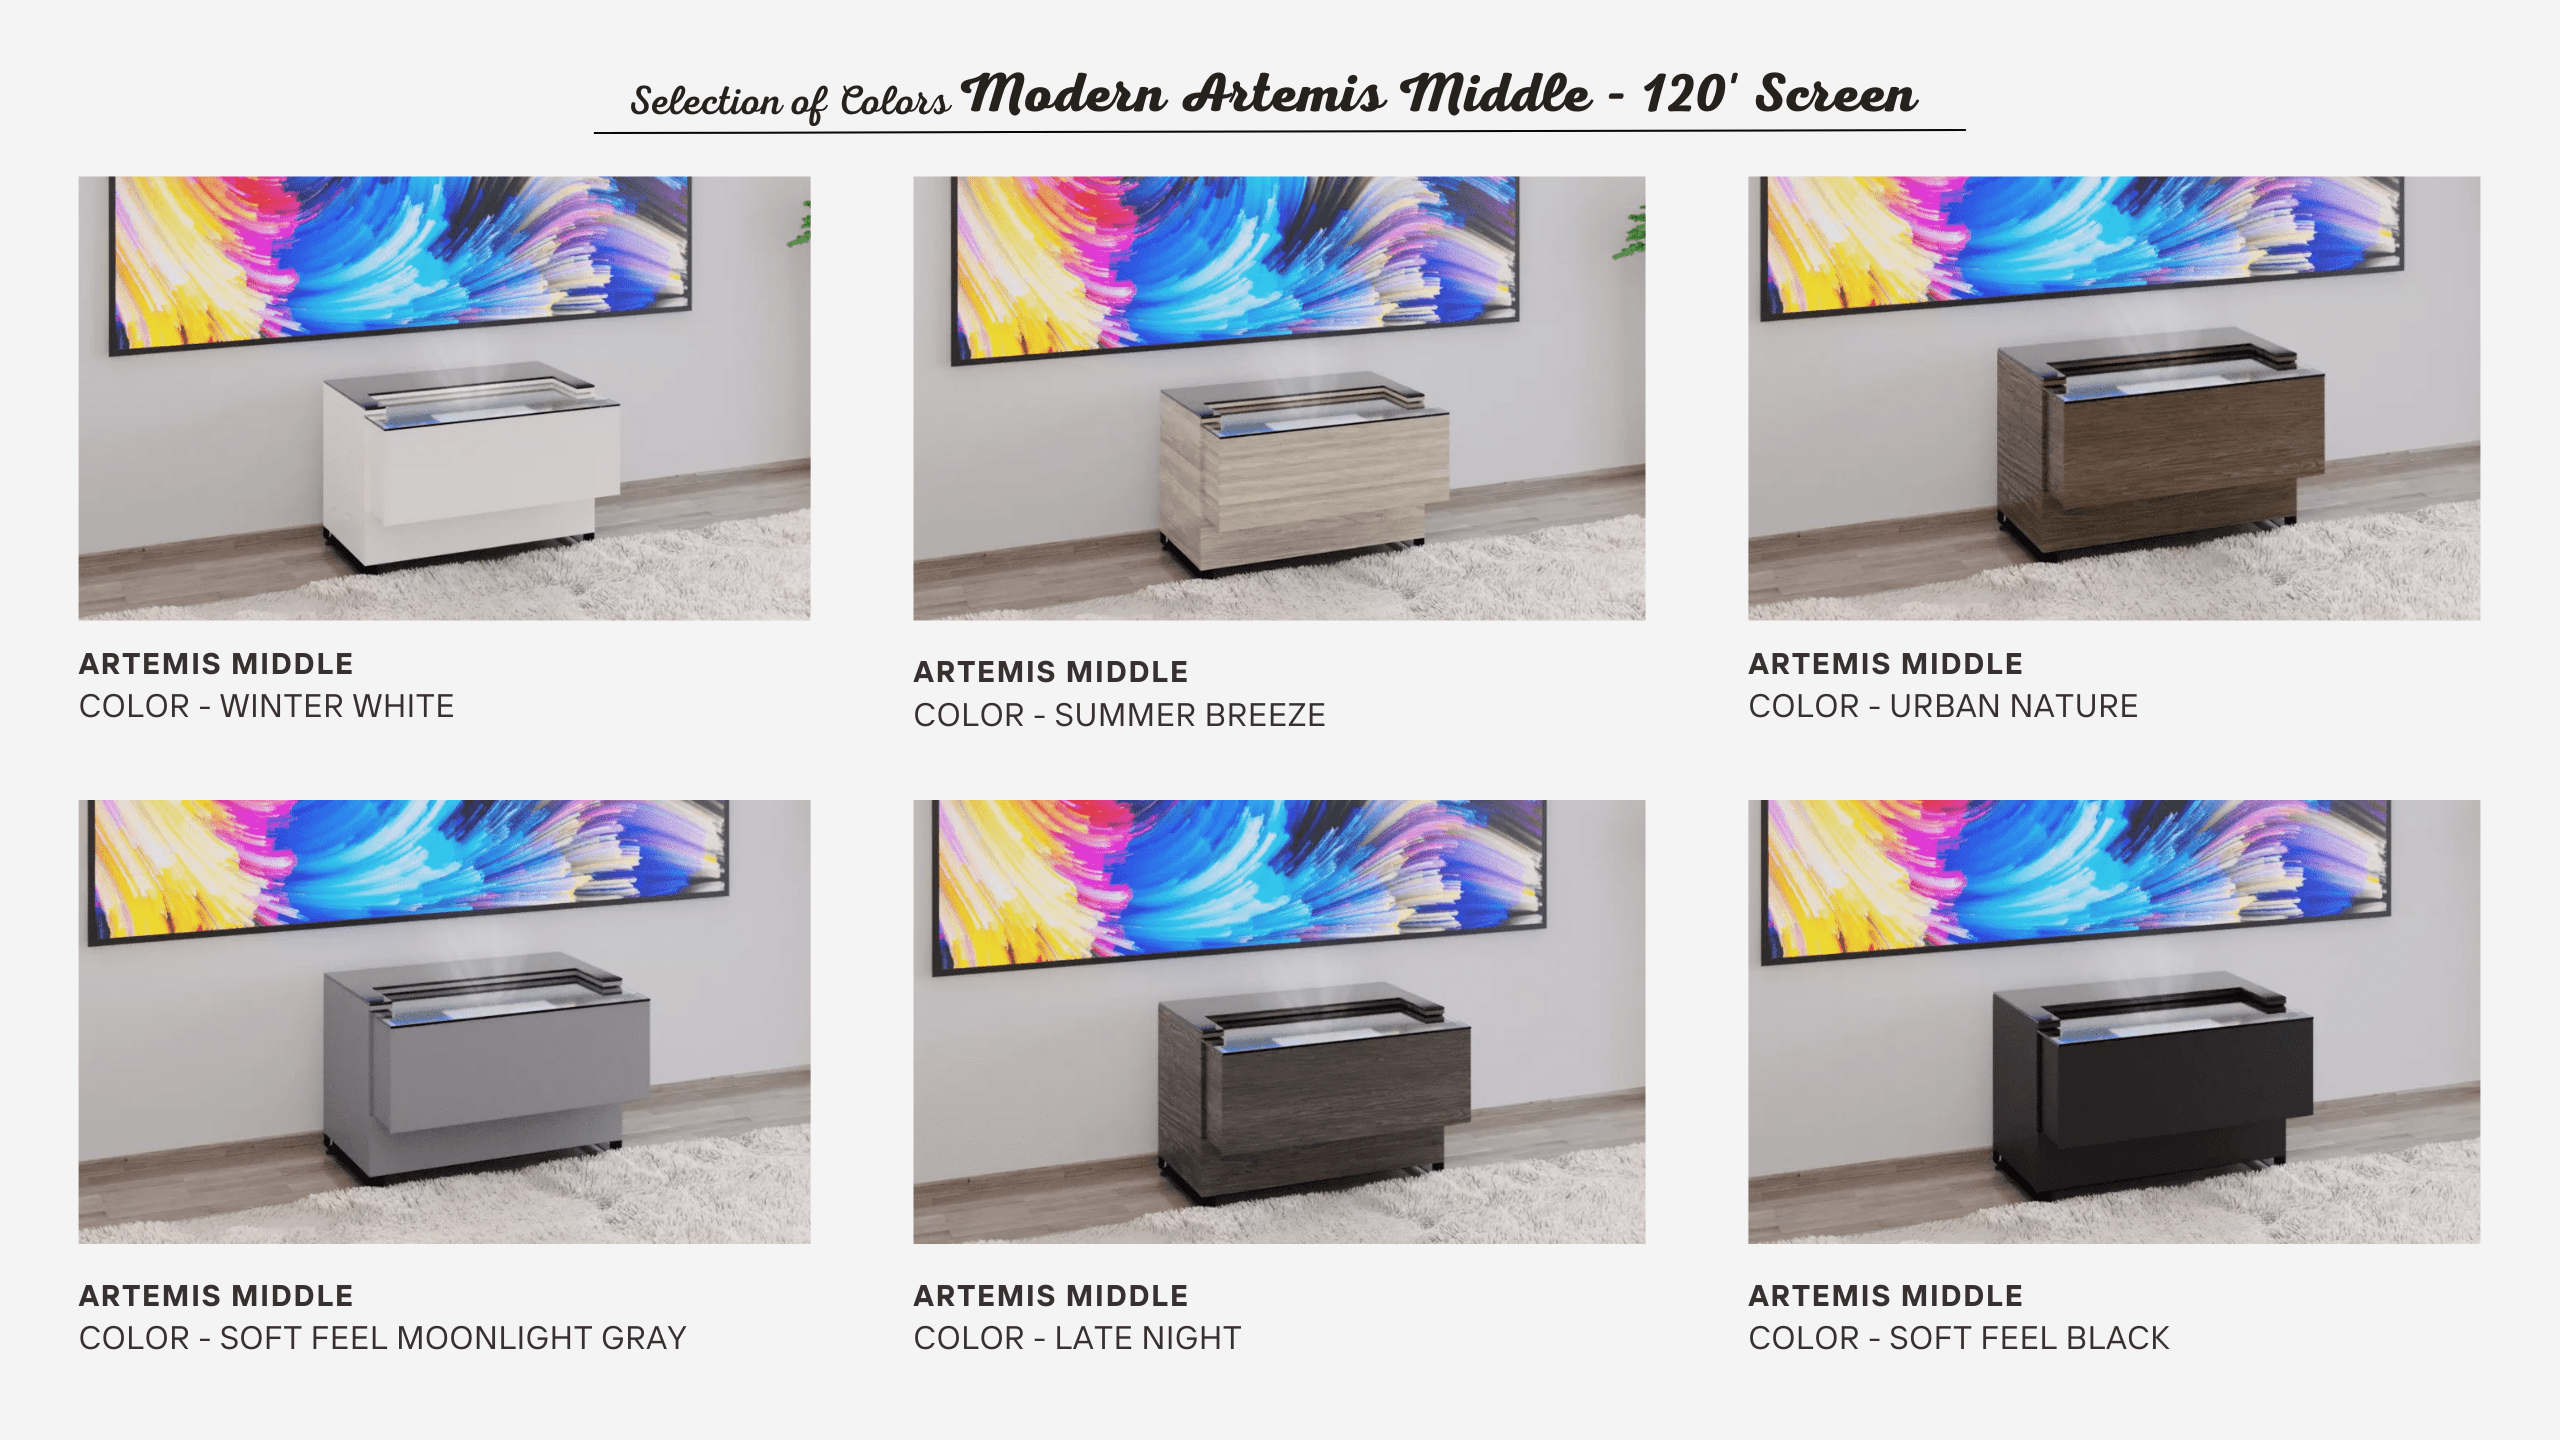 Modern Artemis Middle | 120' Screen | Small Cabinets | Aegis AV Cabinets